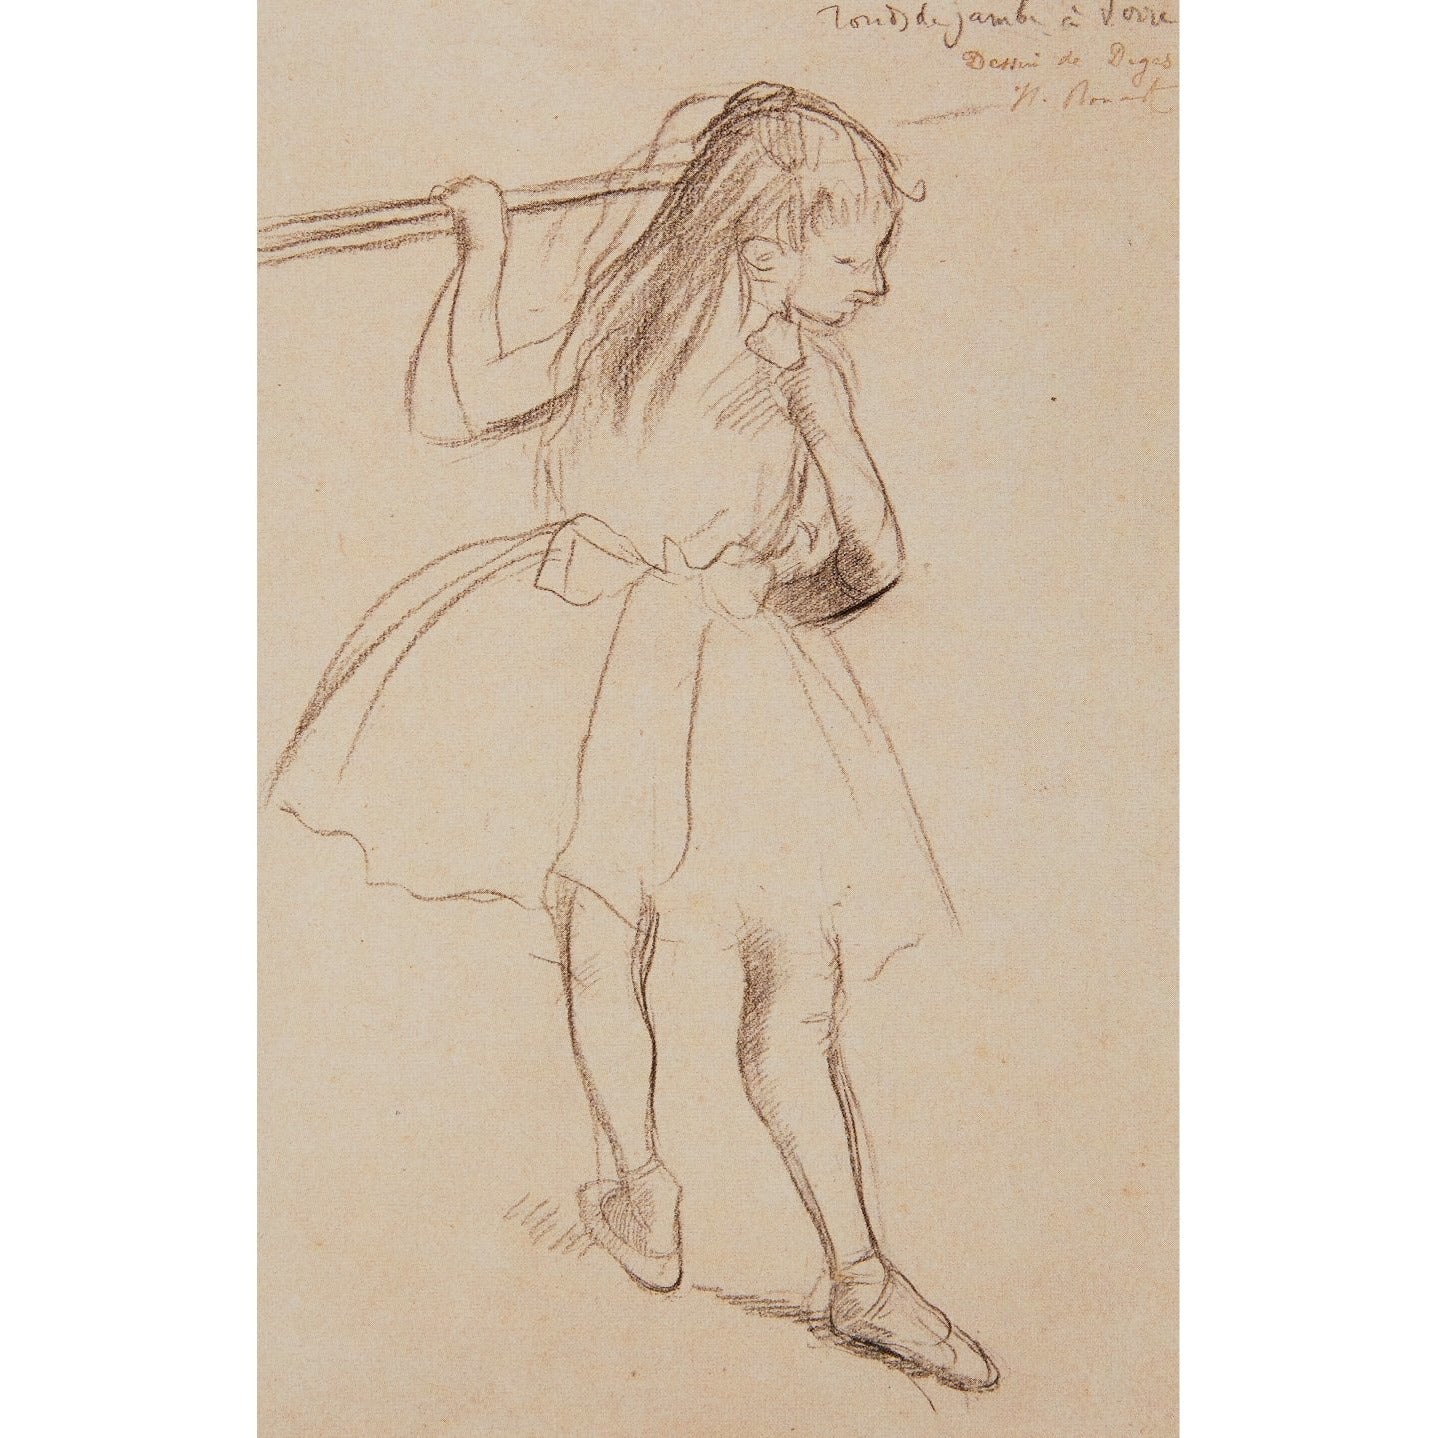 Notecard - Girl Dancer at the Barre by Edgar Degas. From the collection of the Fitzwilliam Museum Cambridge, brought to you by CuratingCambridge.co.uk